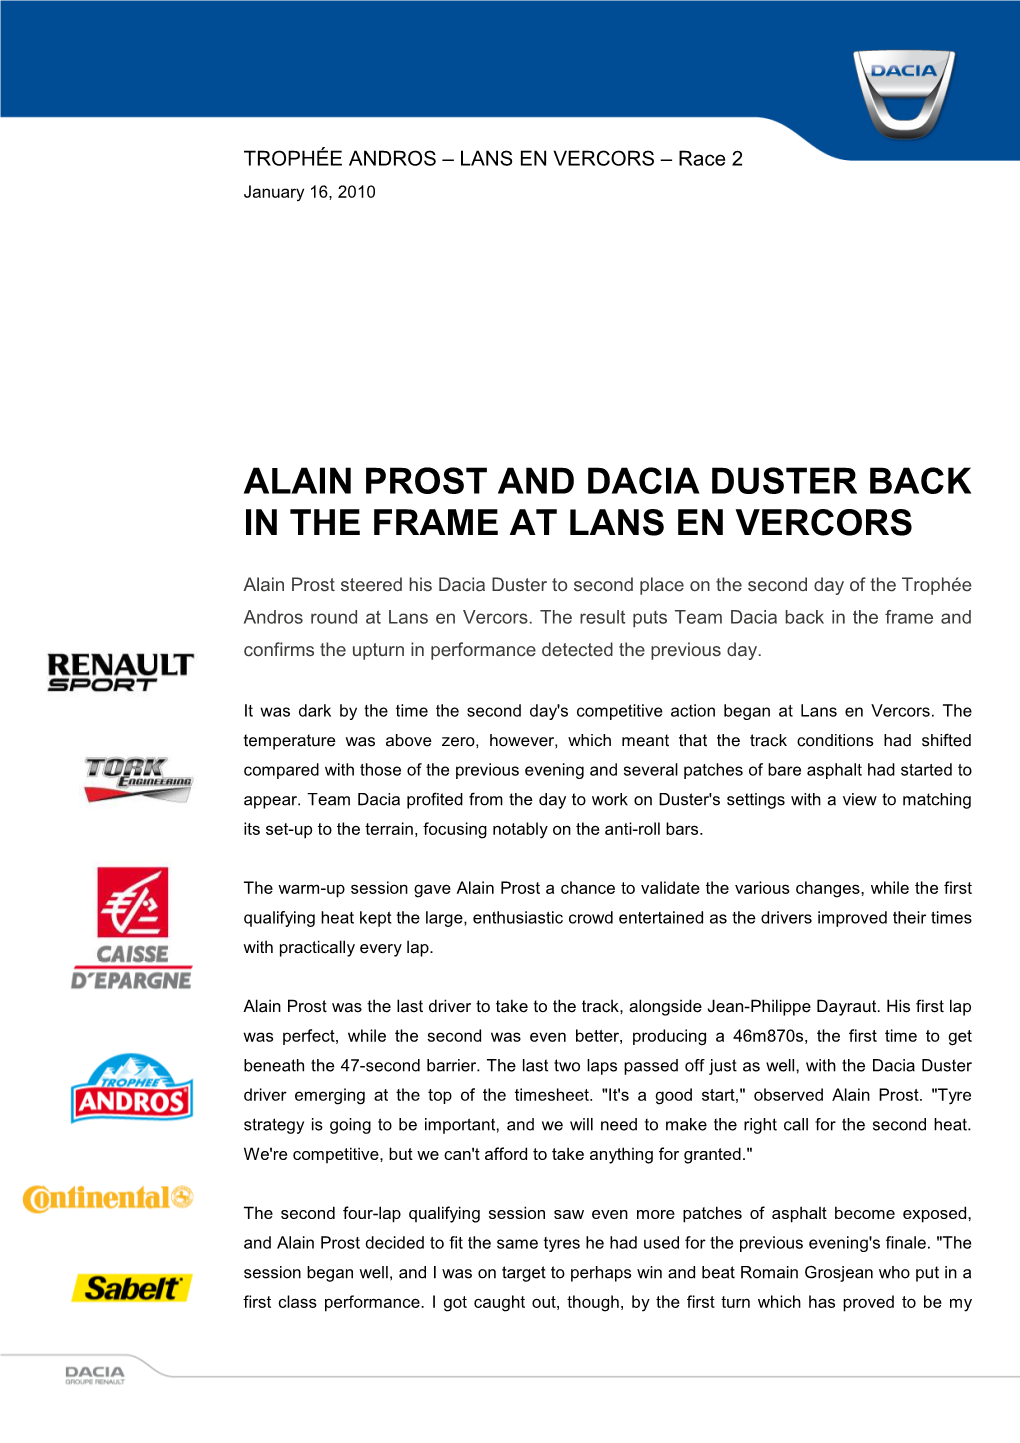 Alain Prost and Dacia Duster Back in the Frame at Lans En Vercors